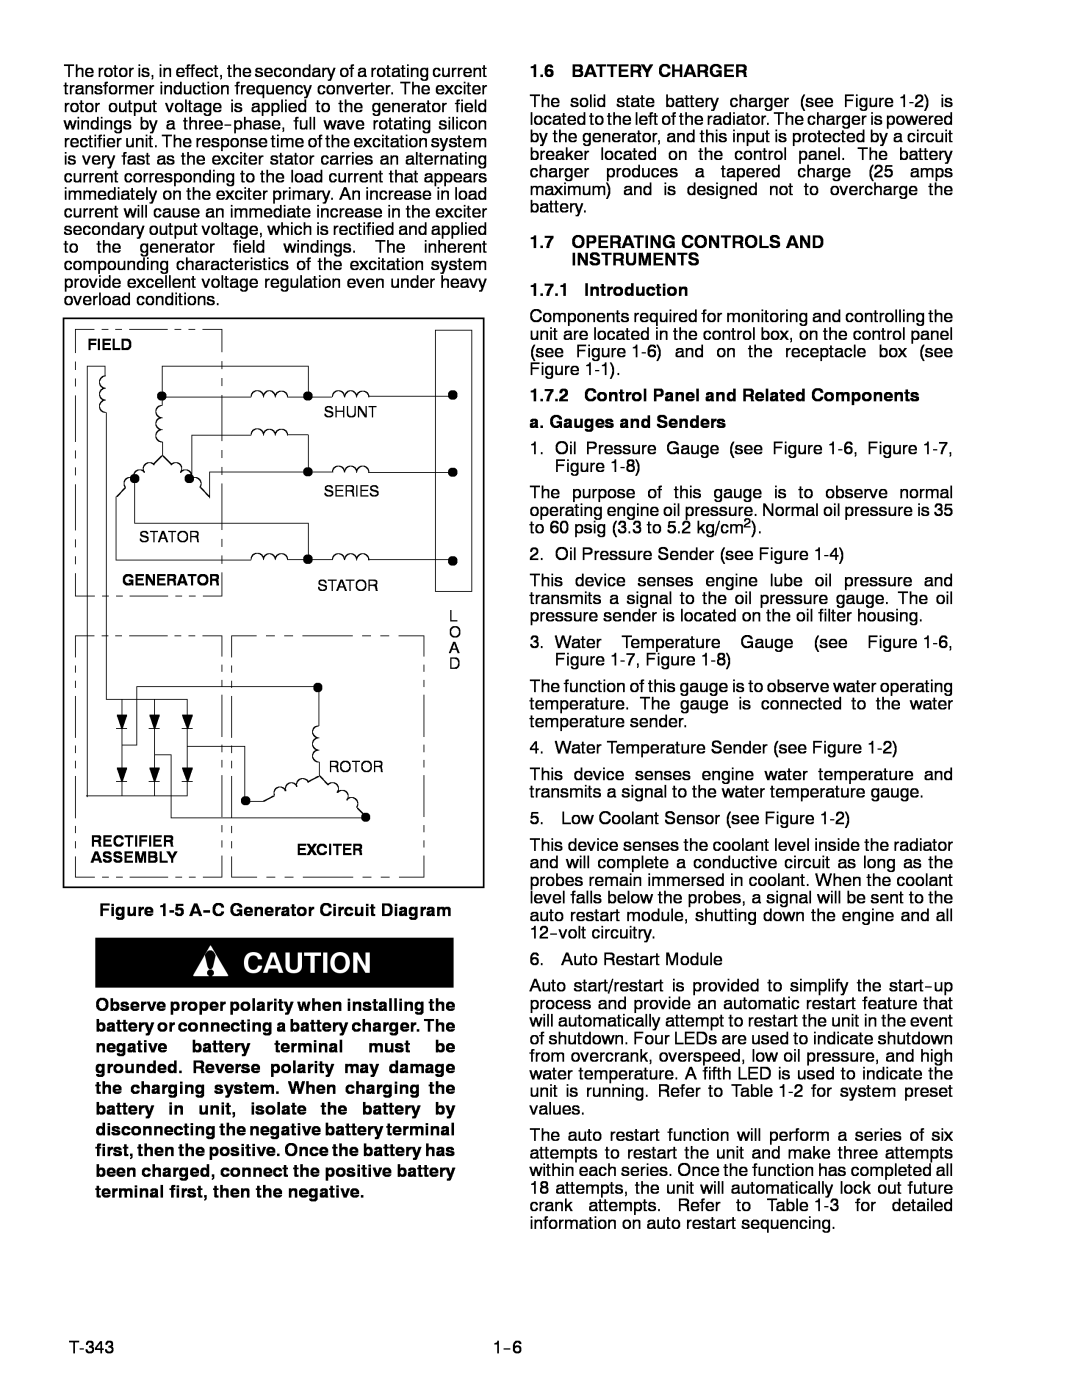 Carrier 69UG15 5 A--C Generator Circuit Diagram, Battery Charger, OPERATING CONTROLS AND INSTRUMENTS 1.7.1 Introduction 